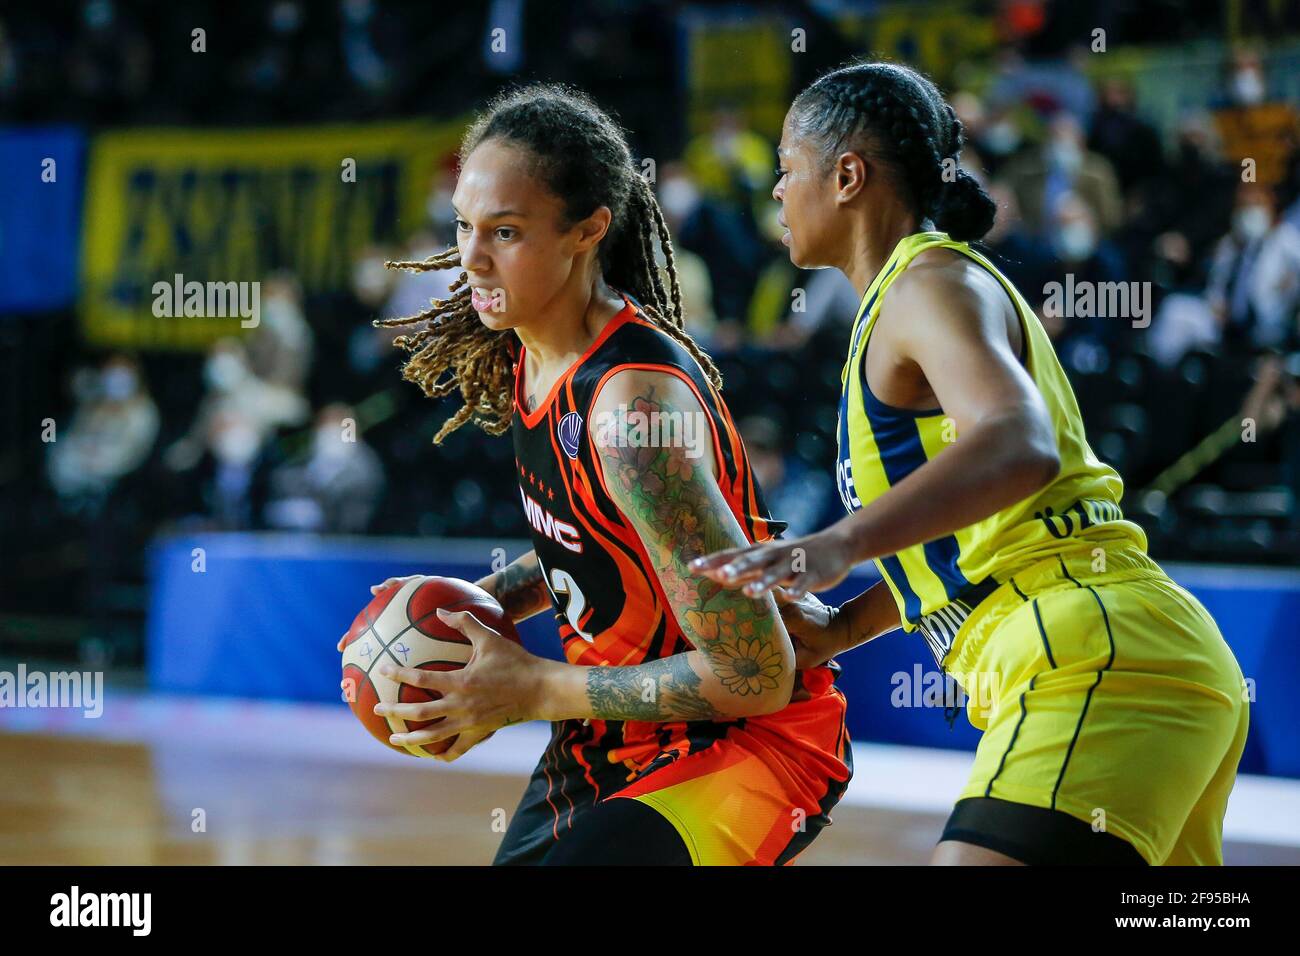 ISTANBUL, Turkey. 16th Apr, 2021: Basketbal: Fenerbahce Oznur Kablo v UMMC Ekaterinburg: Istanboel ISTANBUL, Turkey. 16th Apr, 2021. APRIL 16: Brittney Griner of UMMC Ekaterinburg, Satou Sabally of Fenerbahce Oznur Kablo during the Euroleague Women Final Four match between Fenerbahce Oznur Kablo and UMMC Ekaterinburg at Volkswagen Arena on April 16, 2021 in Istanbul, Turkey (Photo by /Orange Pictures) Credit: Orange Pics BV/Alamy Live News Stock Photo